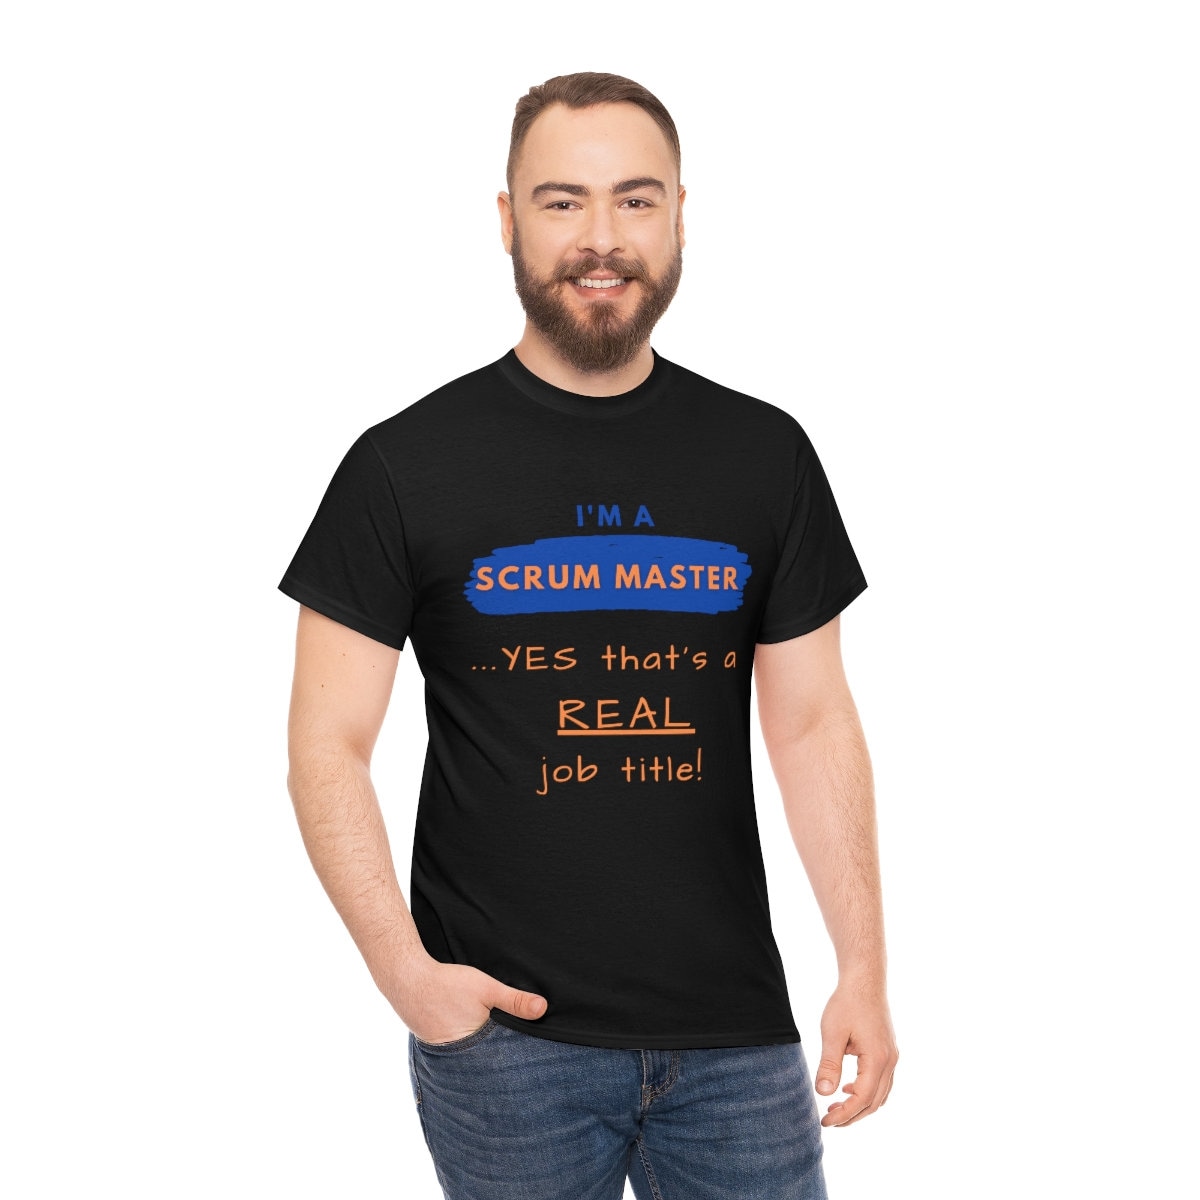 I'm Your Scrum Master, Not Your Mommy Unisex Heavy Cotton Tee 